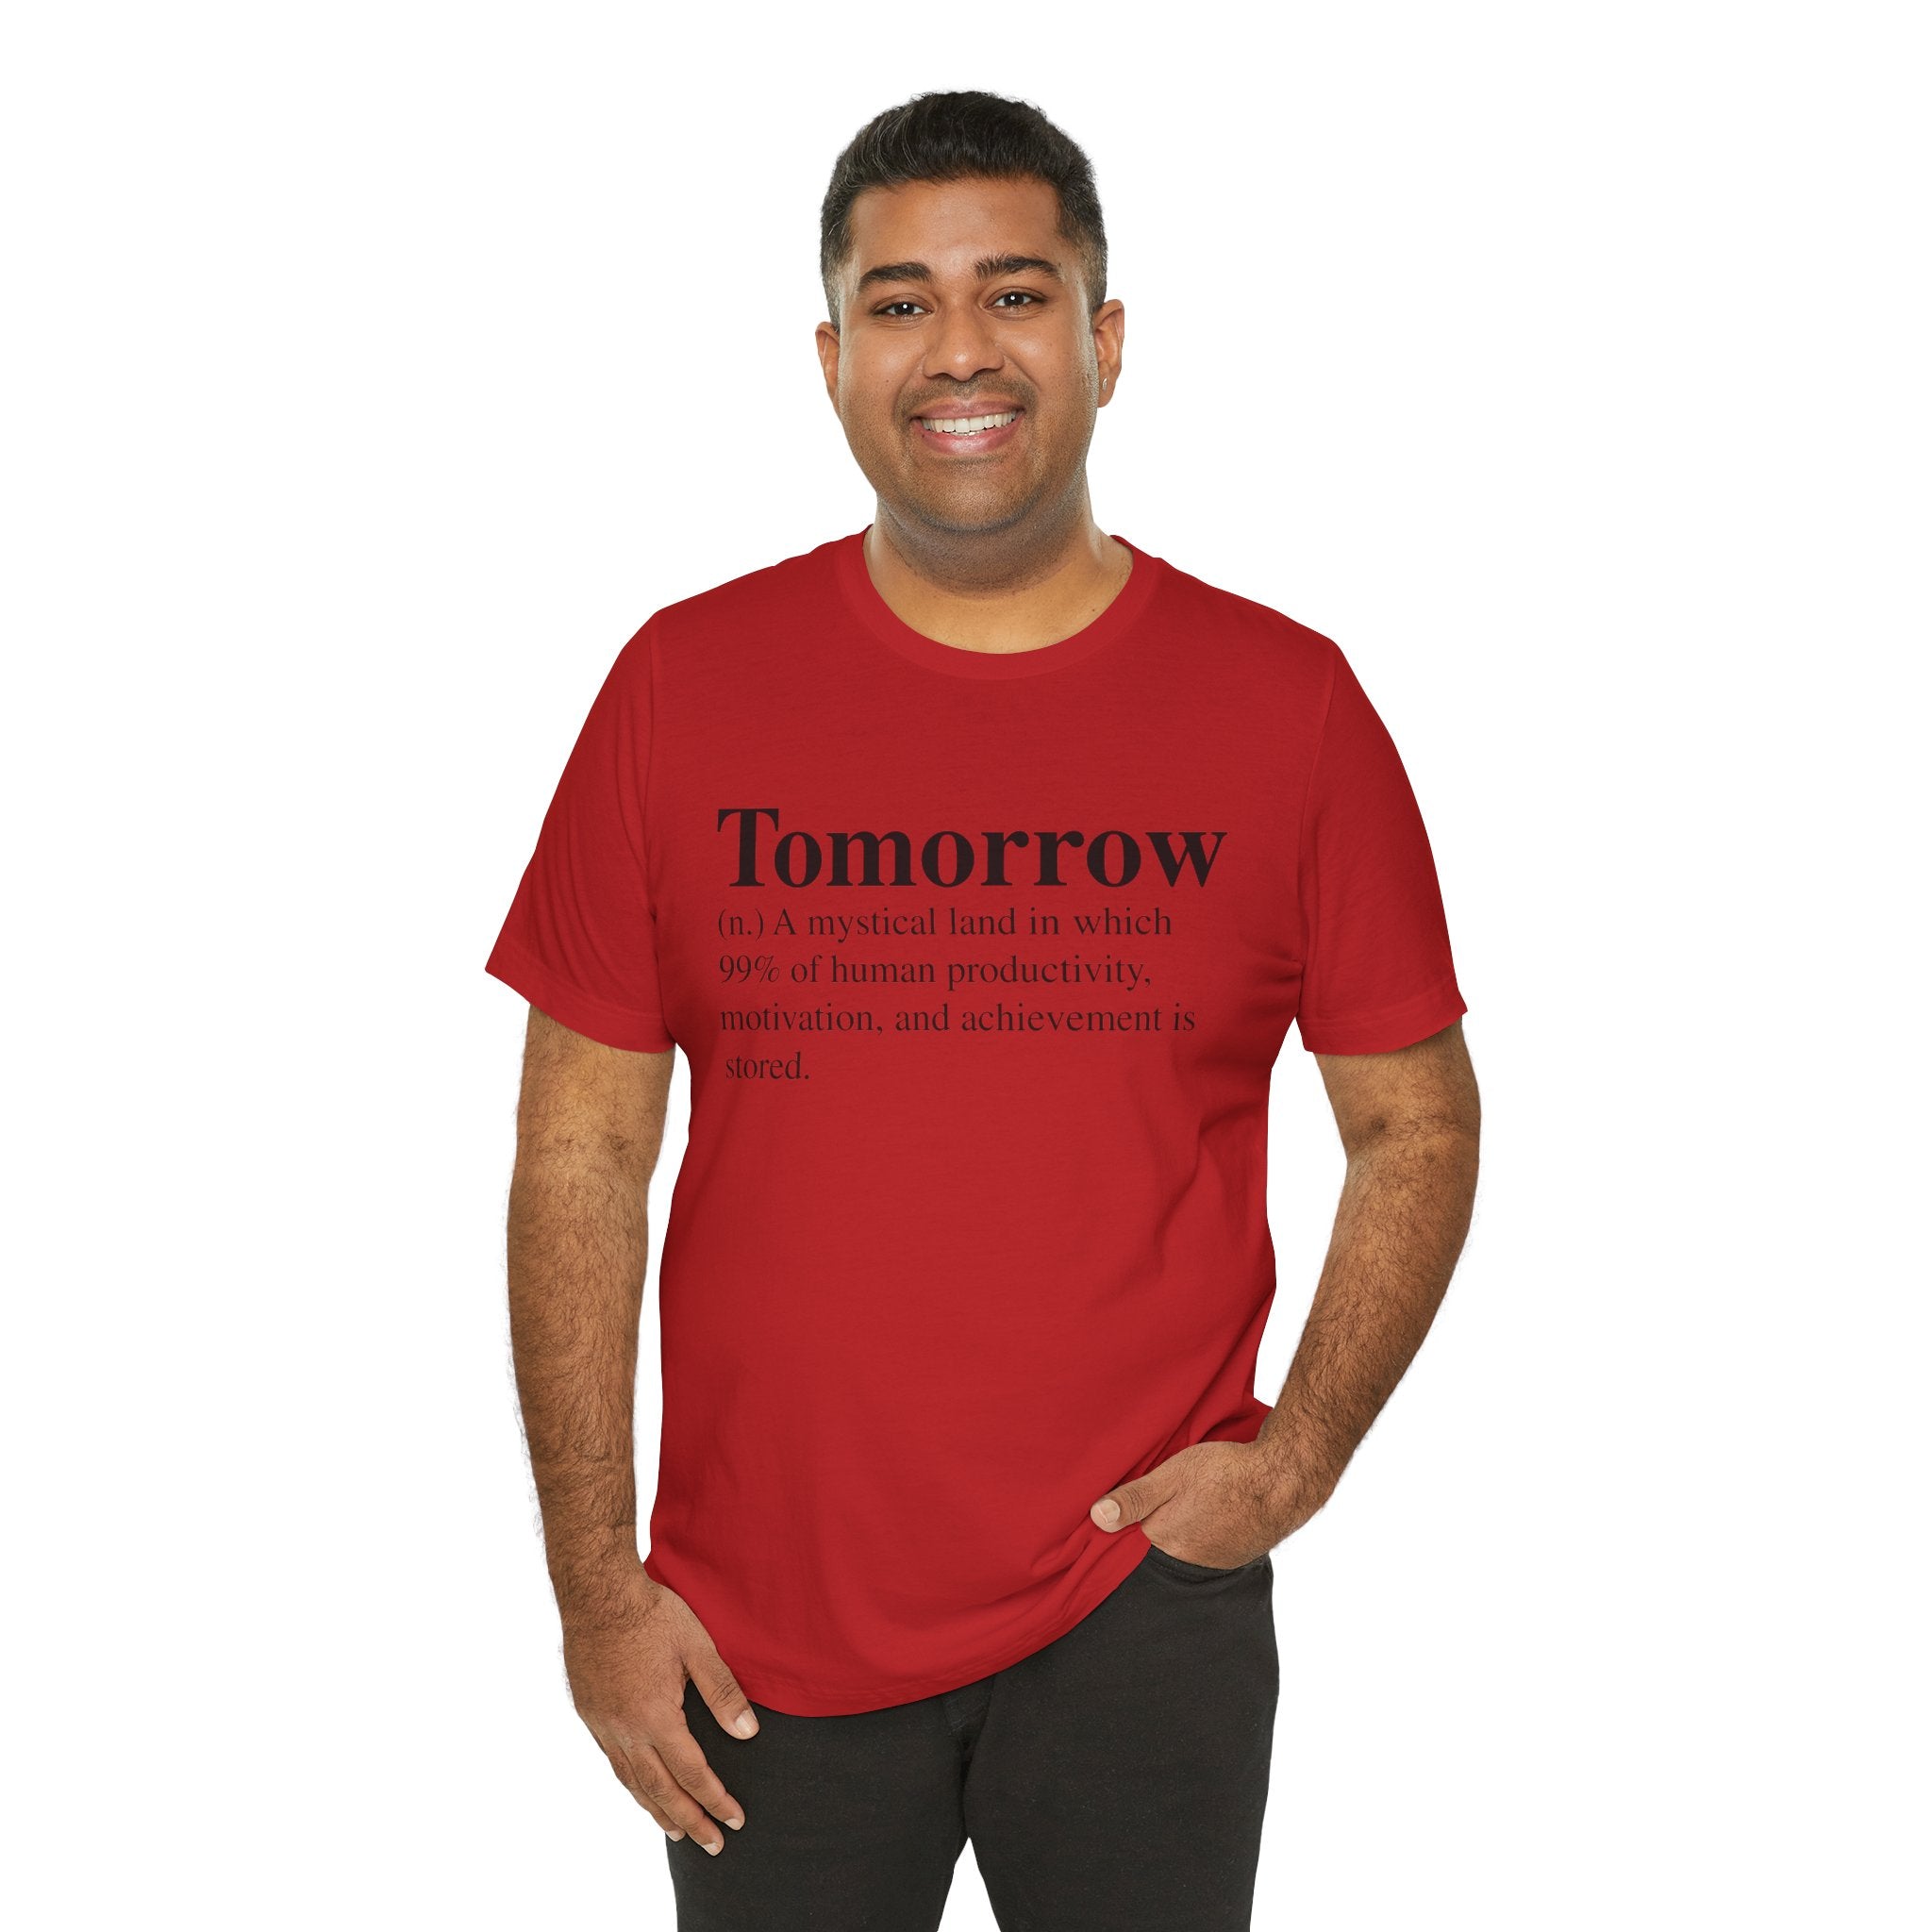 Man smiling in a red, soft cotton Tomorrow T-Shirt with a humorous definition of "tomorrow" quality print on it.